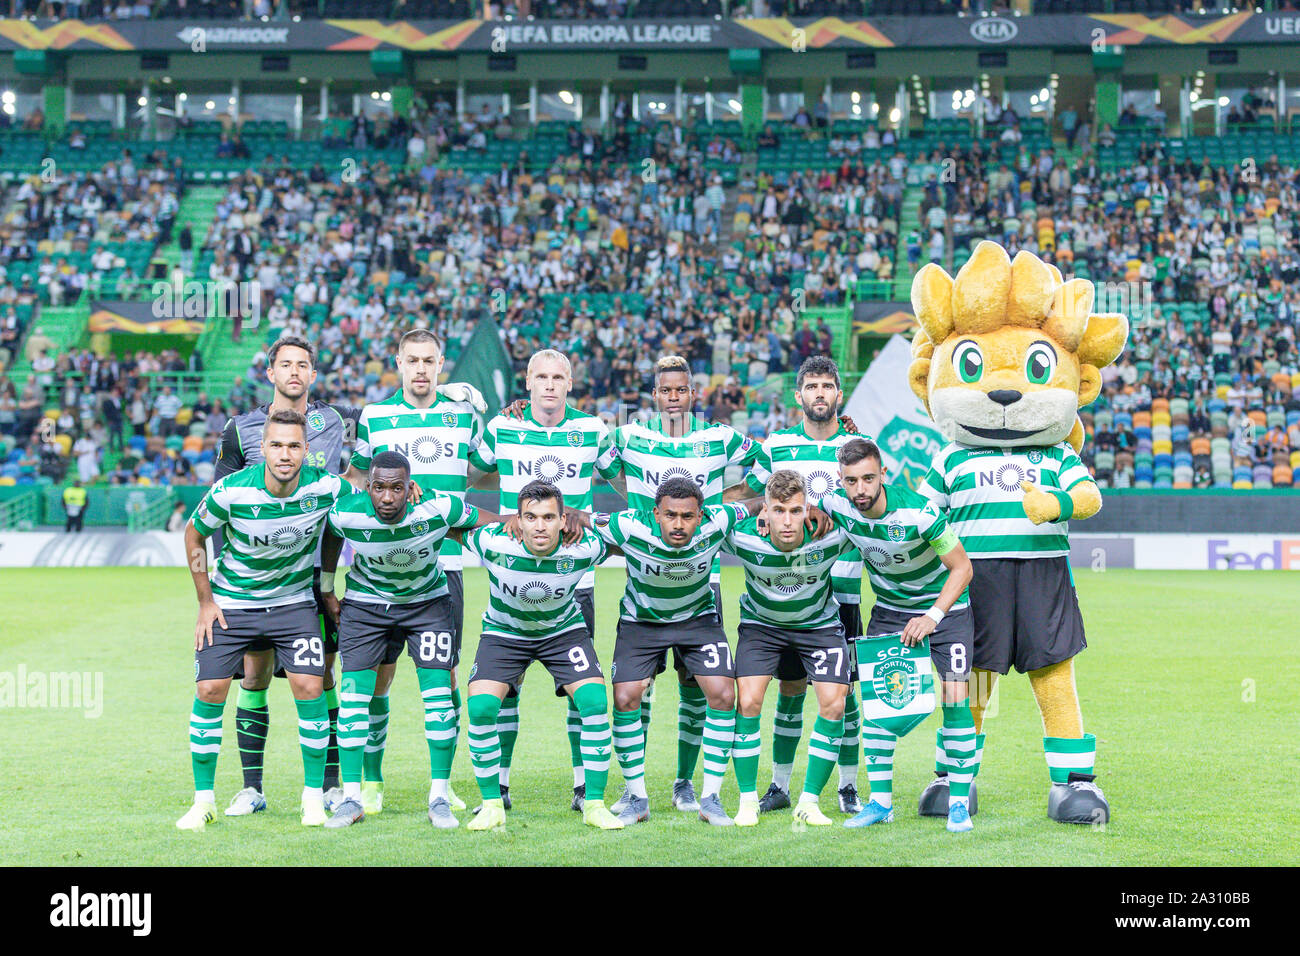 October 03, 2019. Lisbon, Portugal. Sporting starting team for the game of the UEFA Europa League, Group D, Sporting CP vs Lask Linz Credit: Alexandre de Sousa/Alamy Live News Stock Photo